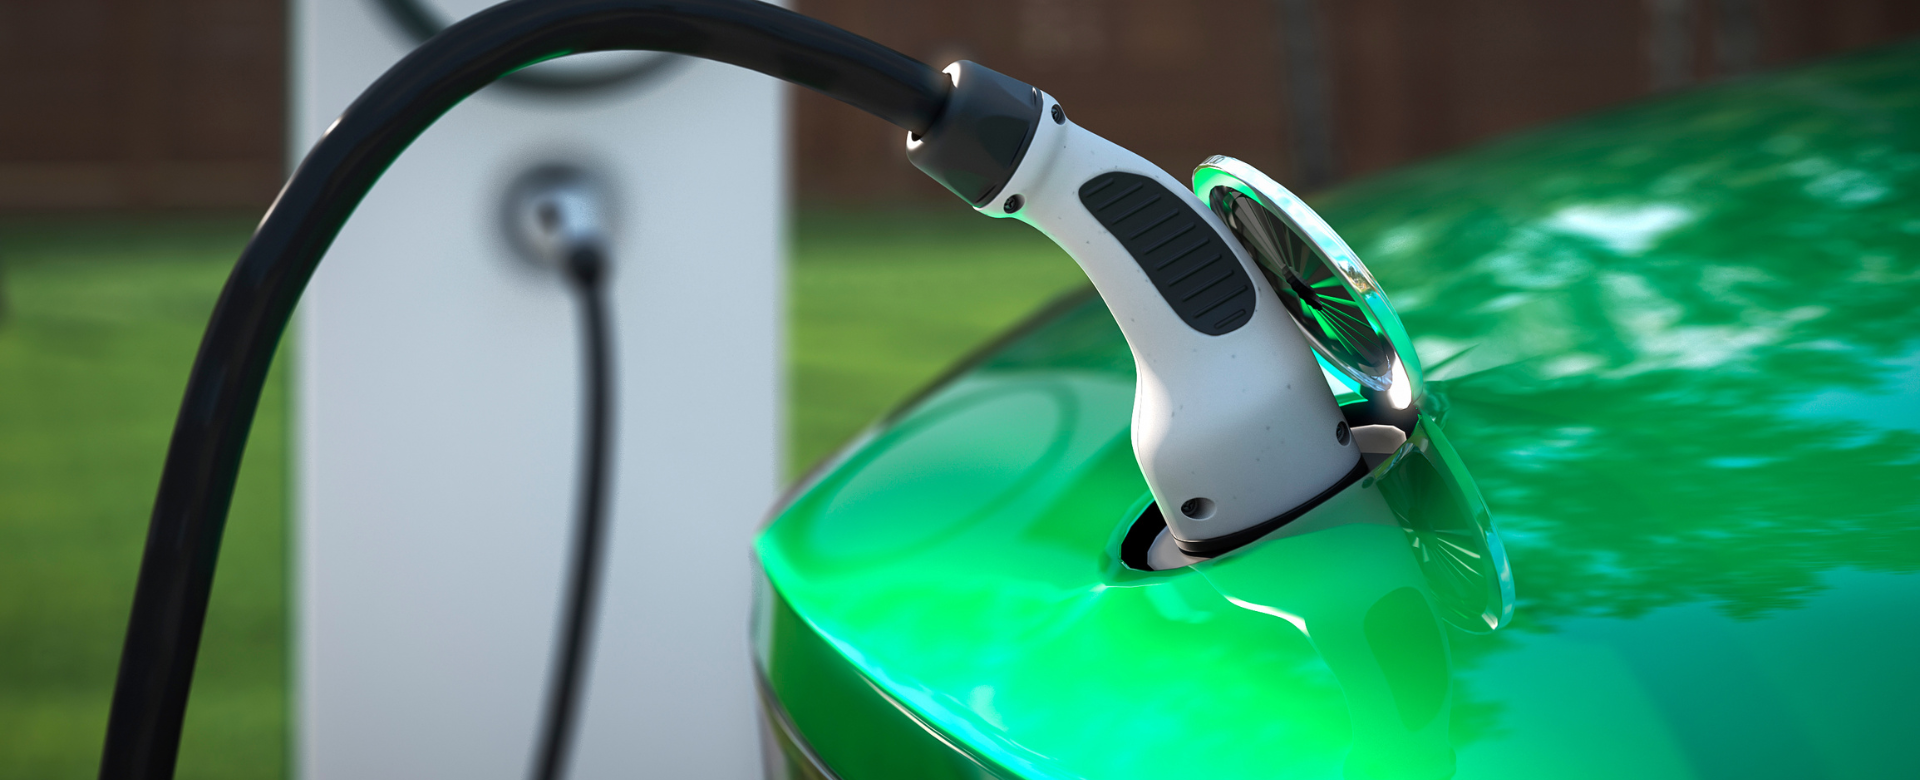 USI Strengthens Electronic Manufacturing Capability in the EV Industry